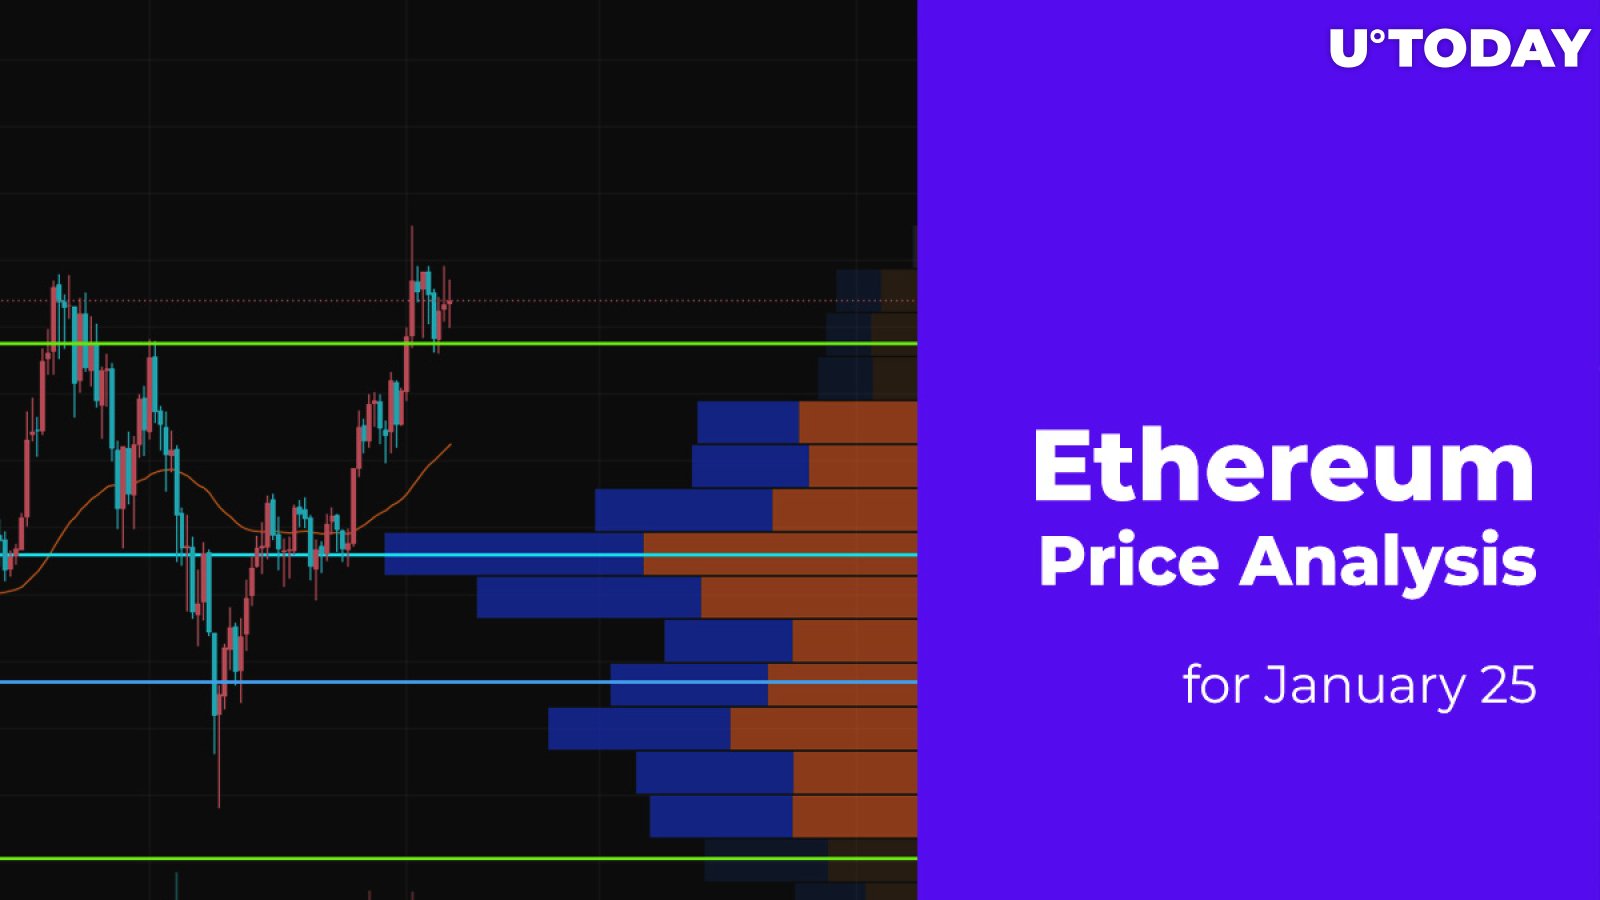 Ethereum (ETH) Price Analysis for January 25